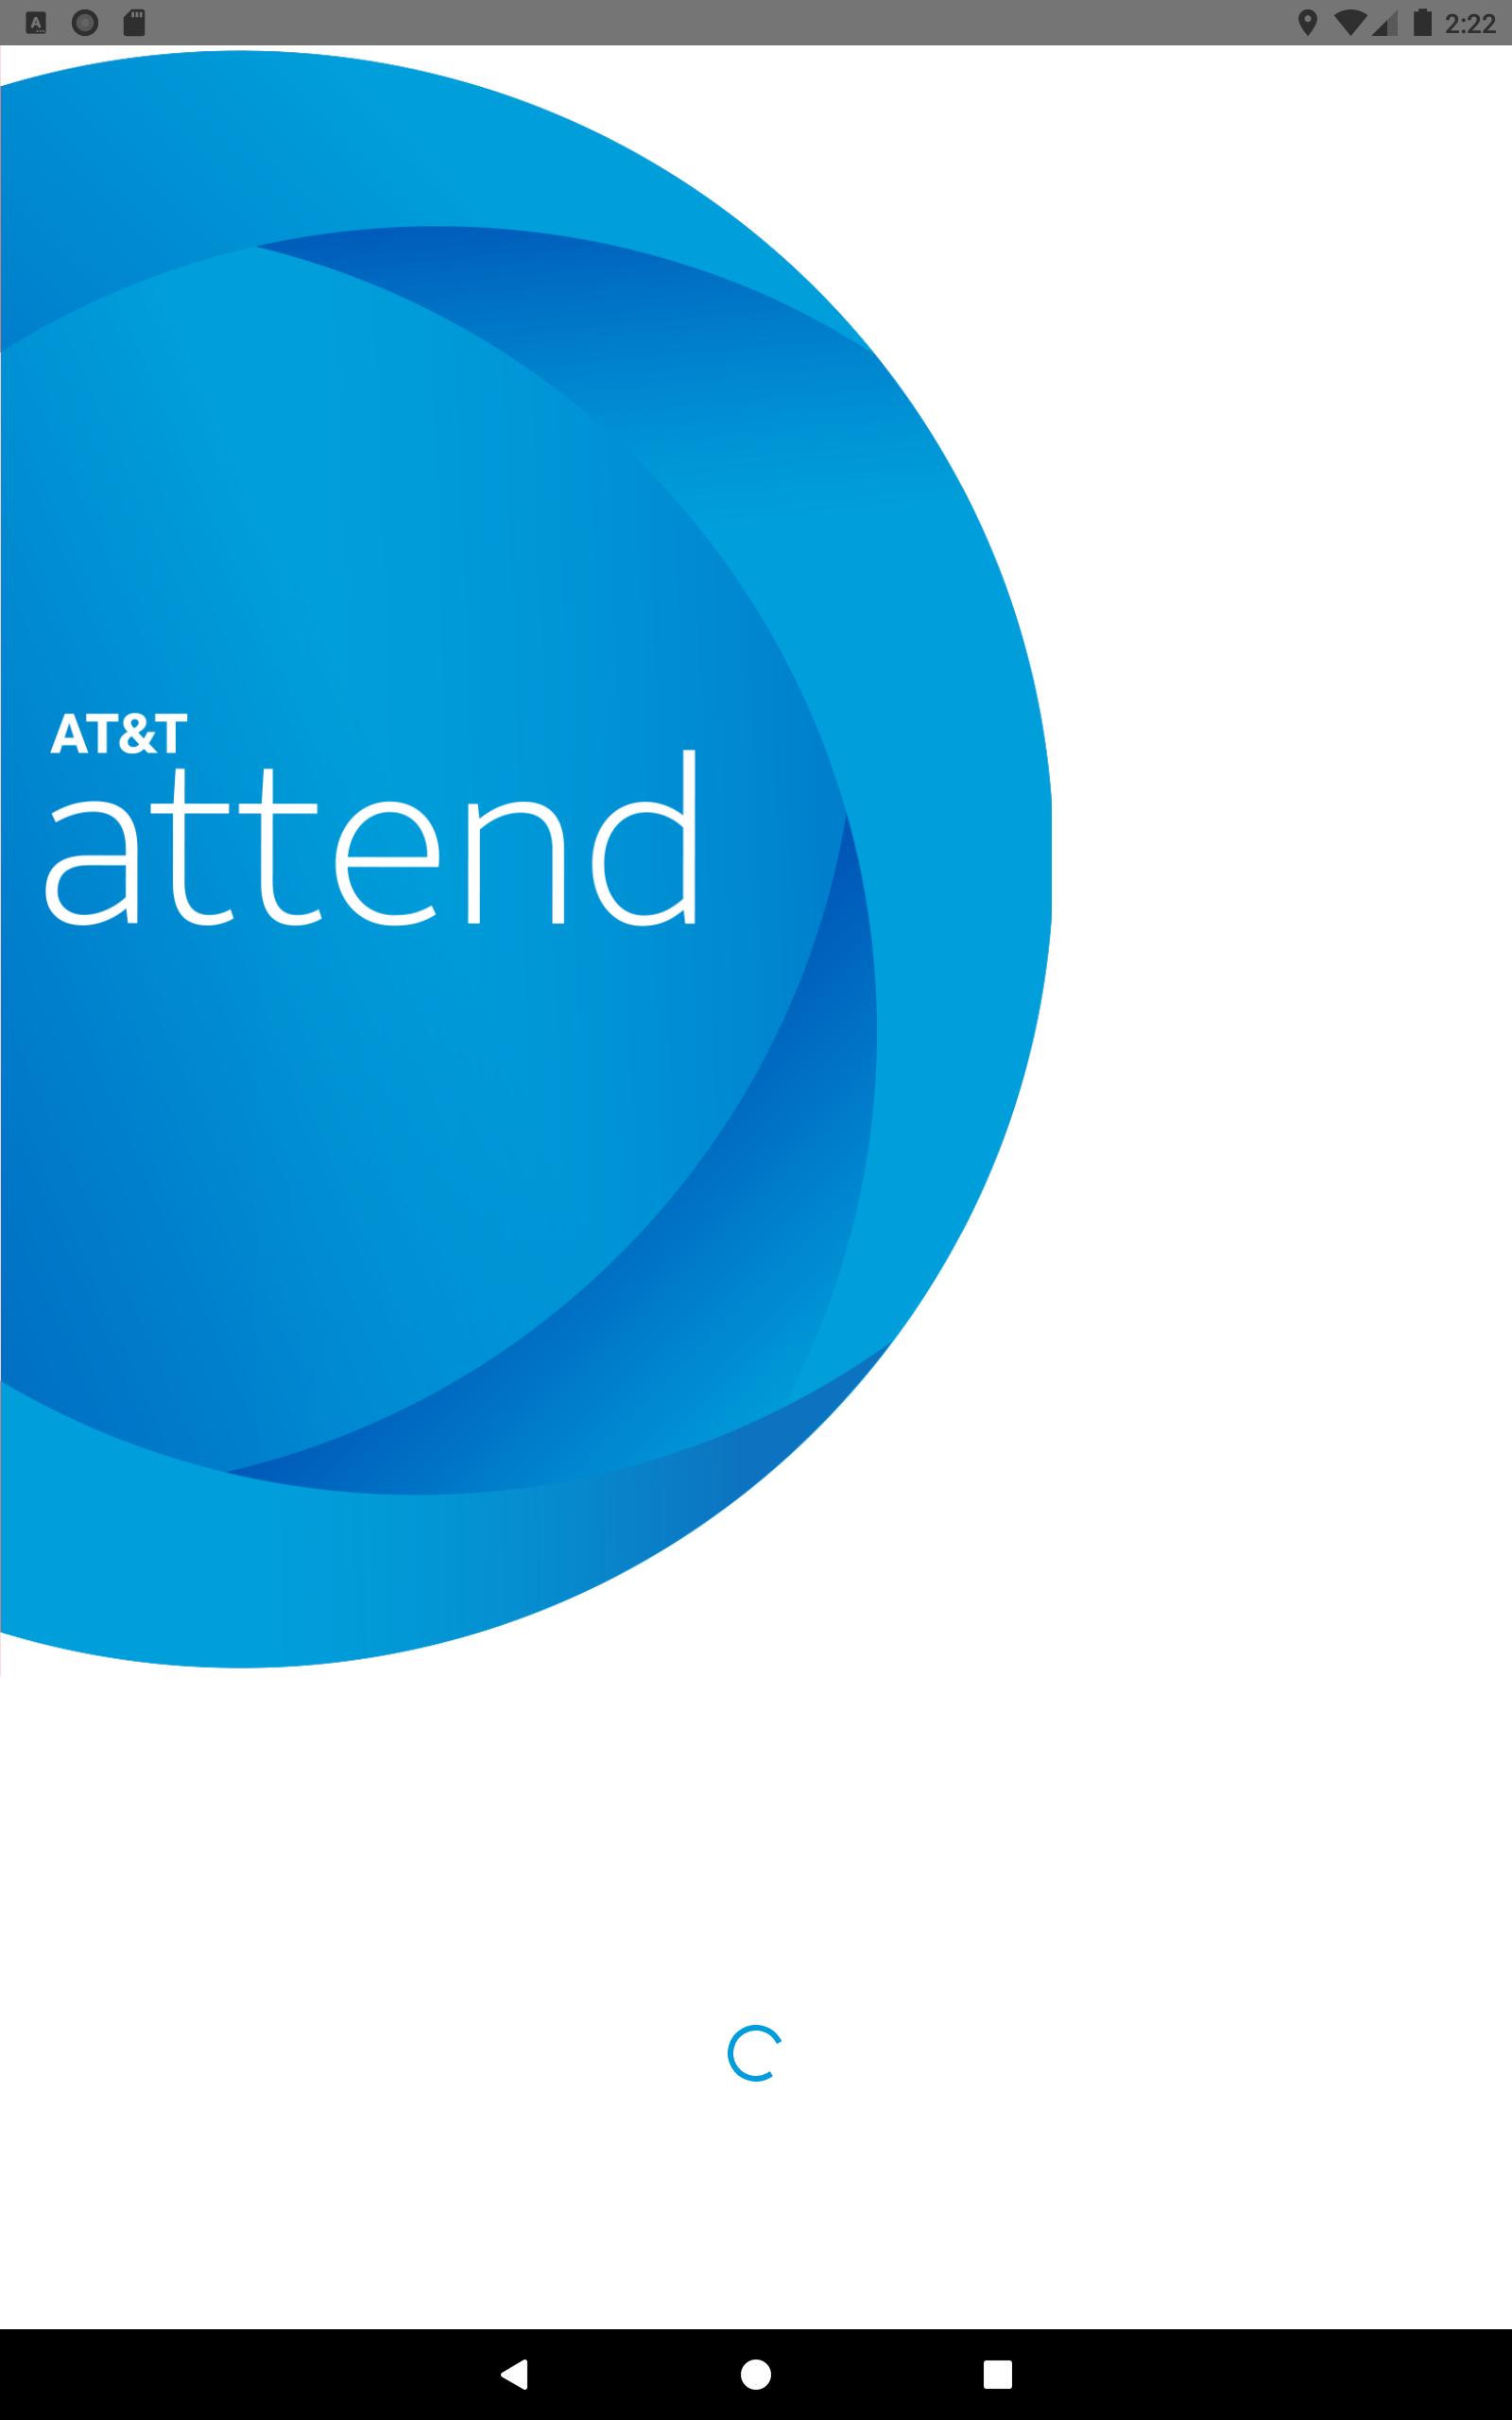 AT&T attend